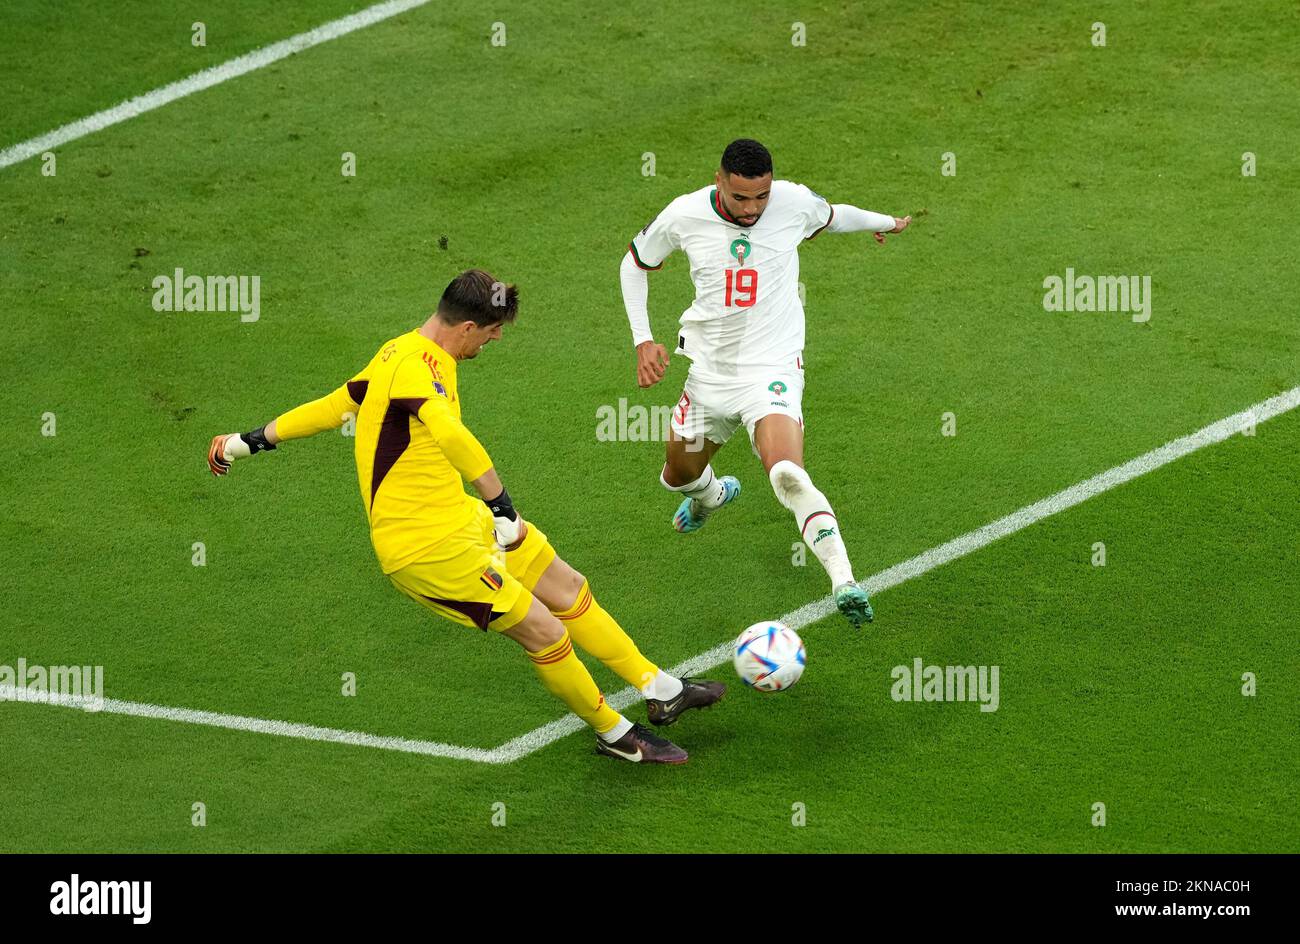 Belgium goalkeeper Thibaut Courtois clears under pressure from Morocco's Youssef En-Nesyri (right) during the FIFA World Cup Group F match at the Al Thumama Stadium, Doha, Qatar. Picture date: Sunday November 27, 2022. Stock Photo